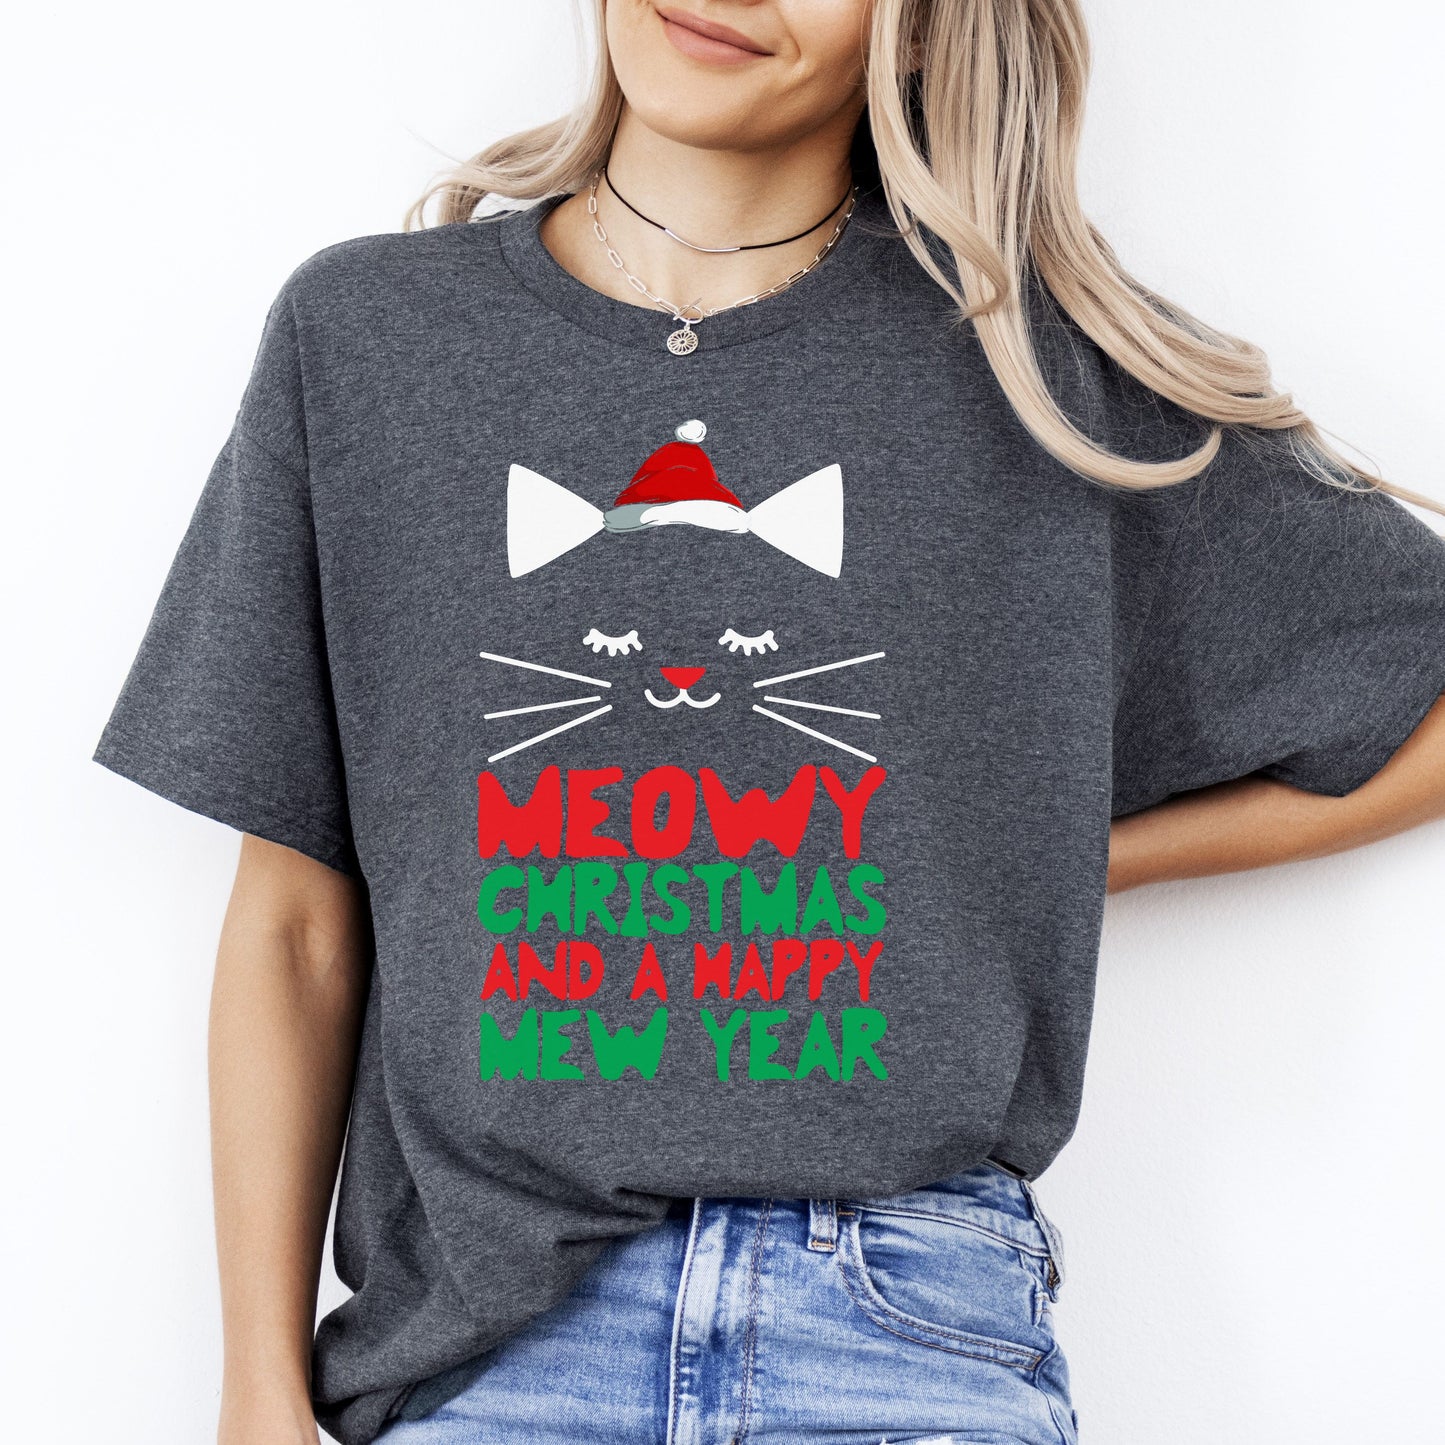 Meowy Christmas and a Happy mew year T-Shirt gift Holiday Cat lover Unisex Tee Black Navy Dark Heather-Dark Heather-Family-Gift-Planet